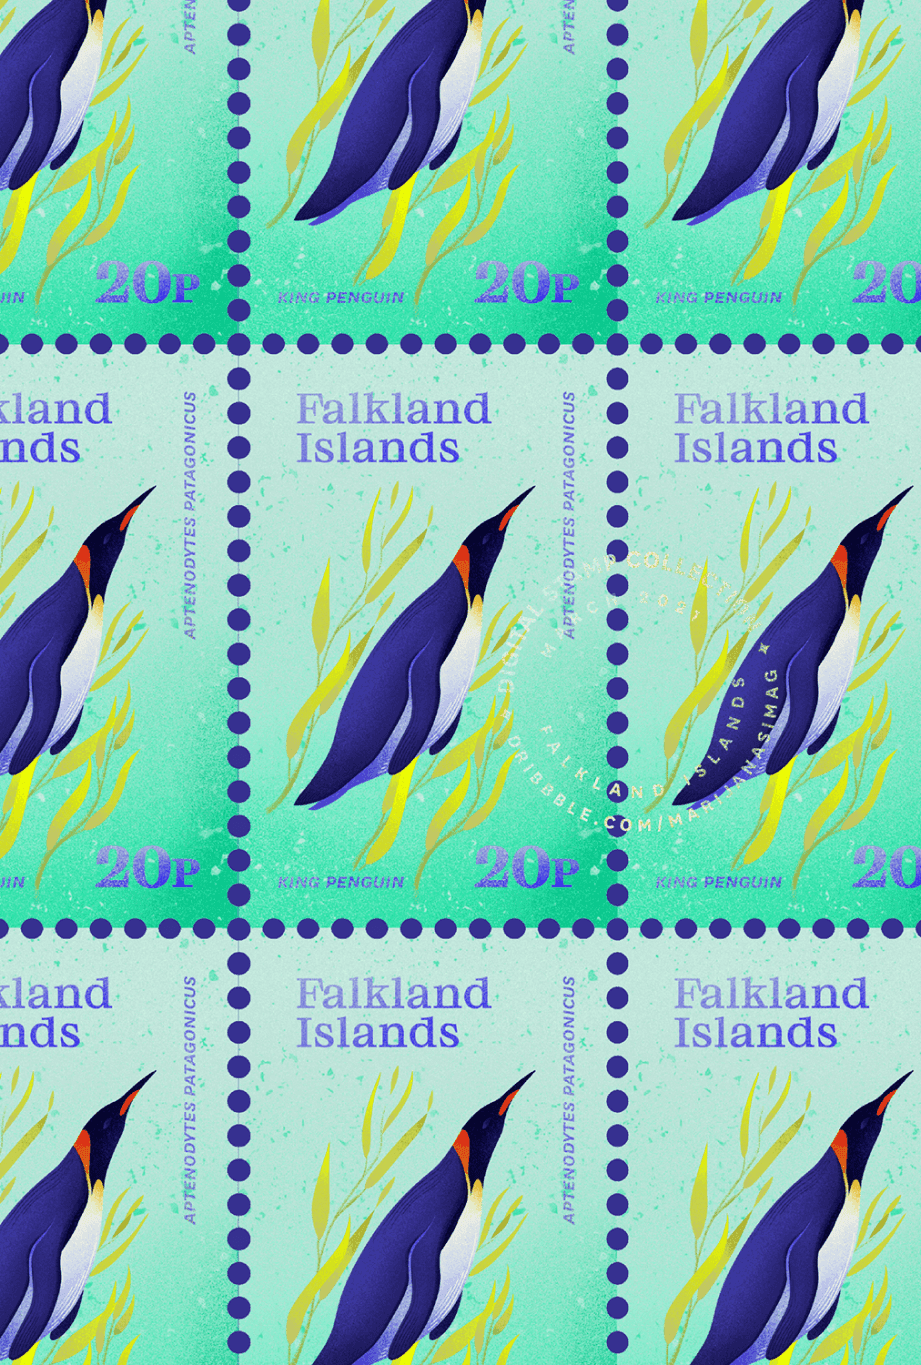 This is my personal project of digitally recreating my grandpa's stamps. It's a homage to his philatelic journey, brought online when I started my own philately collection, but in a different format. Through this collection I've set myself a goal of trying out new softwares.